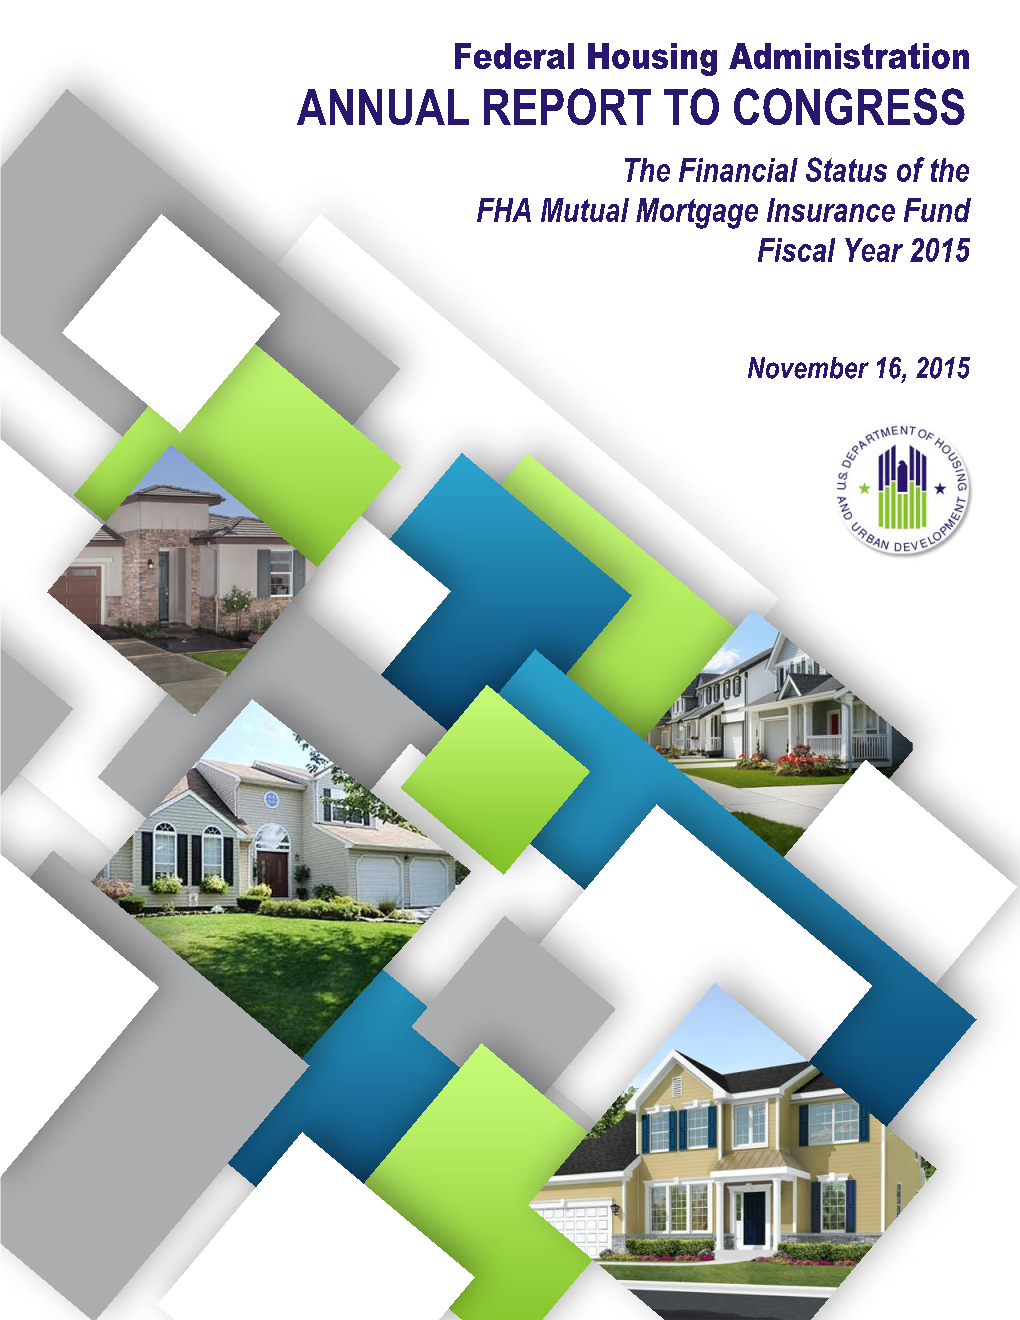 FHA-Insured Loans Curing Delinquencies Than Going Into Default, Thanks to FHA’S Improved Loss Mitigation Processes